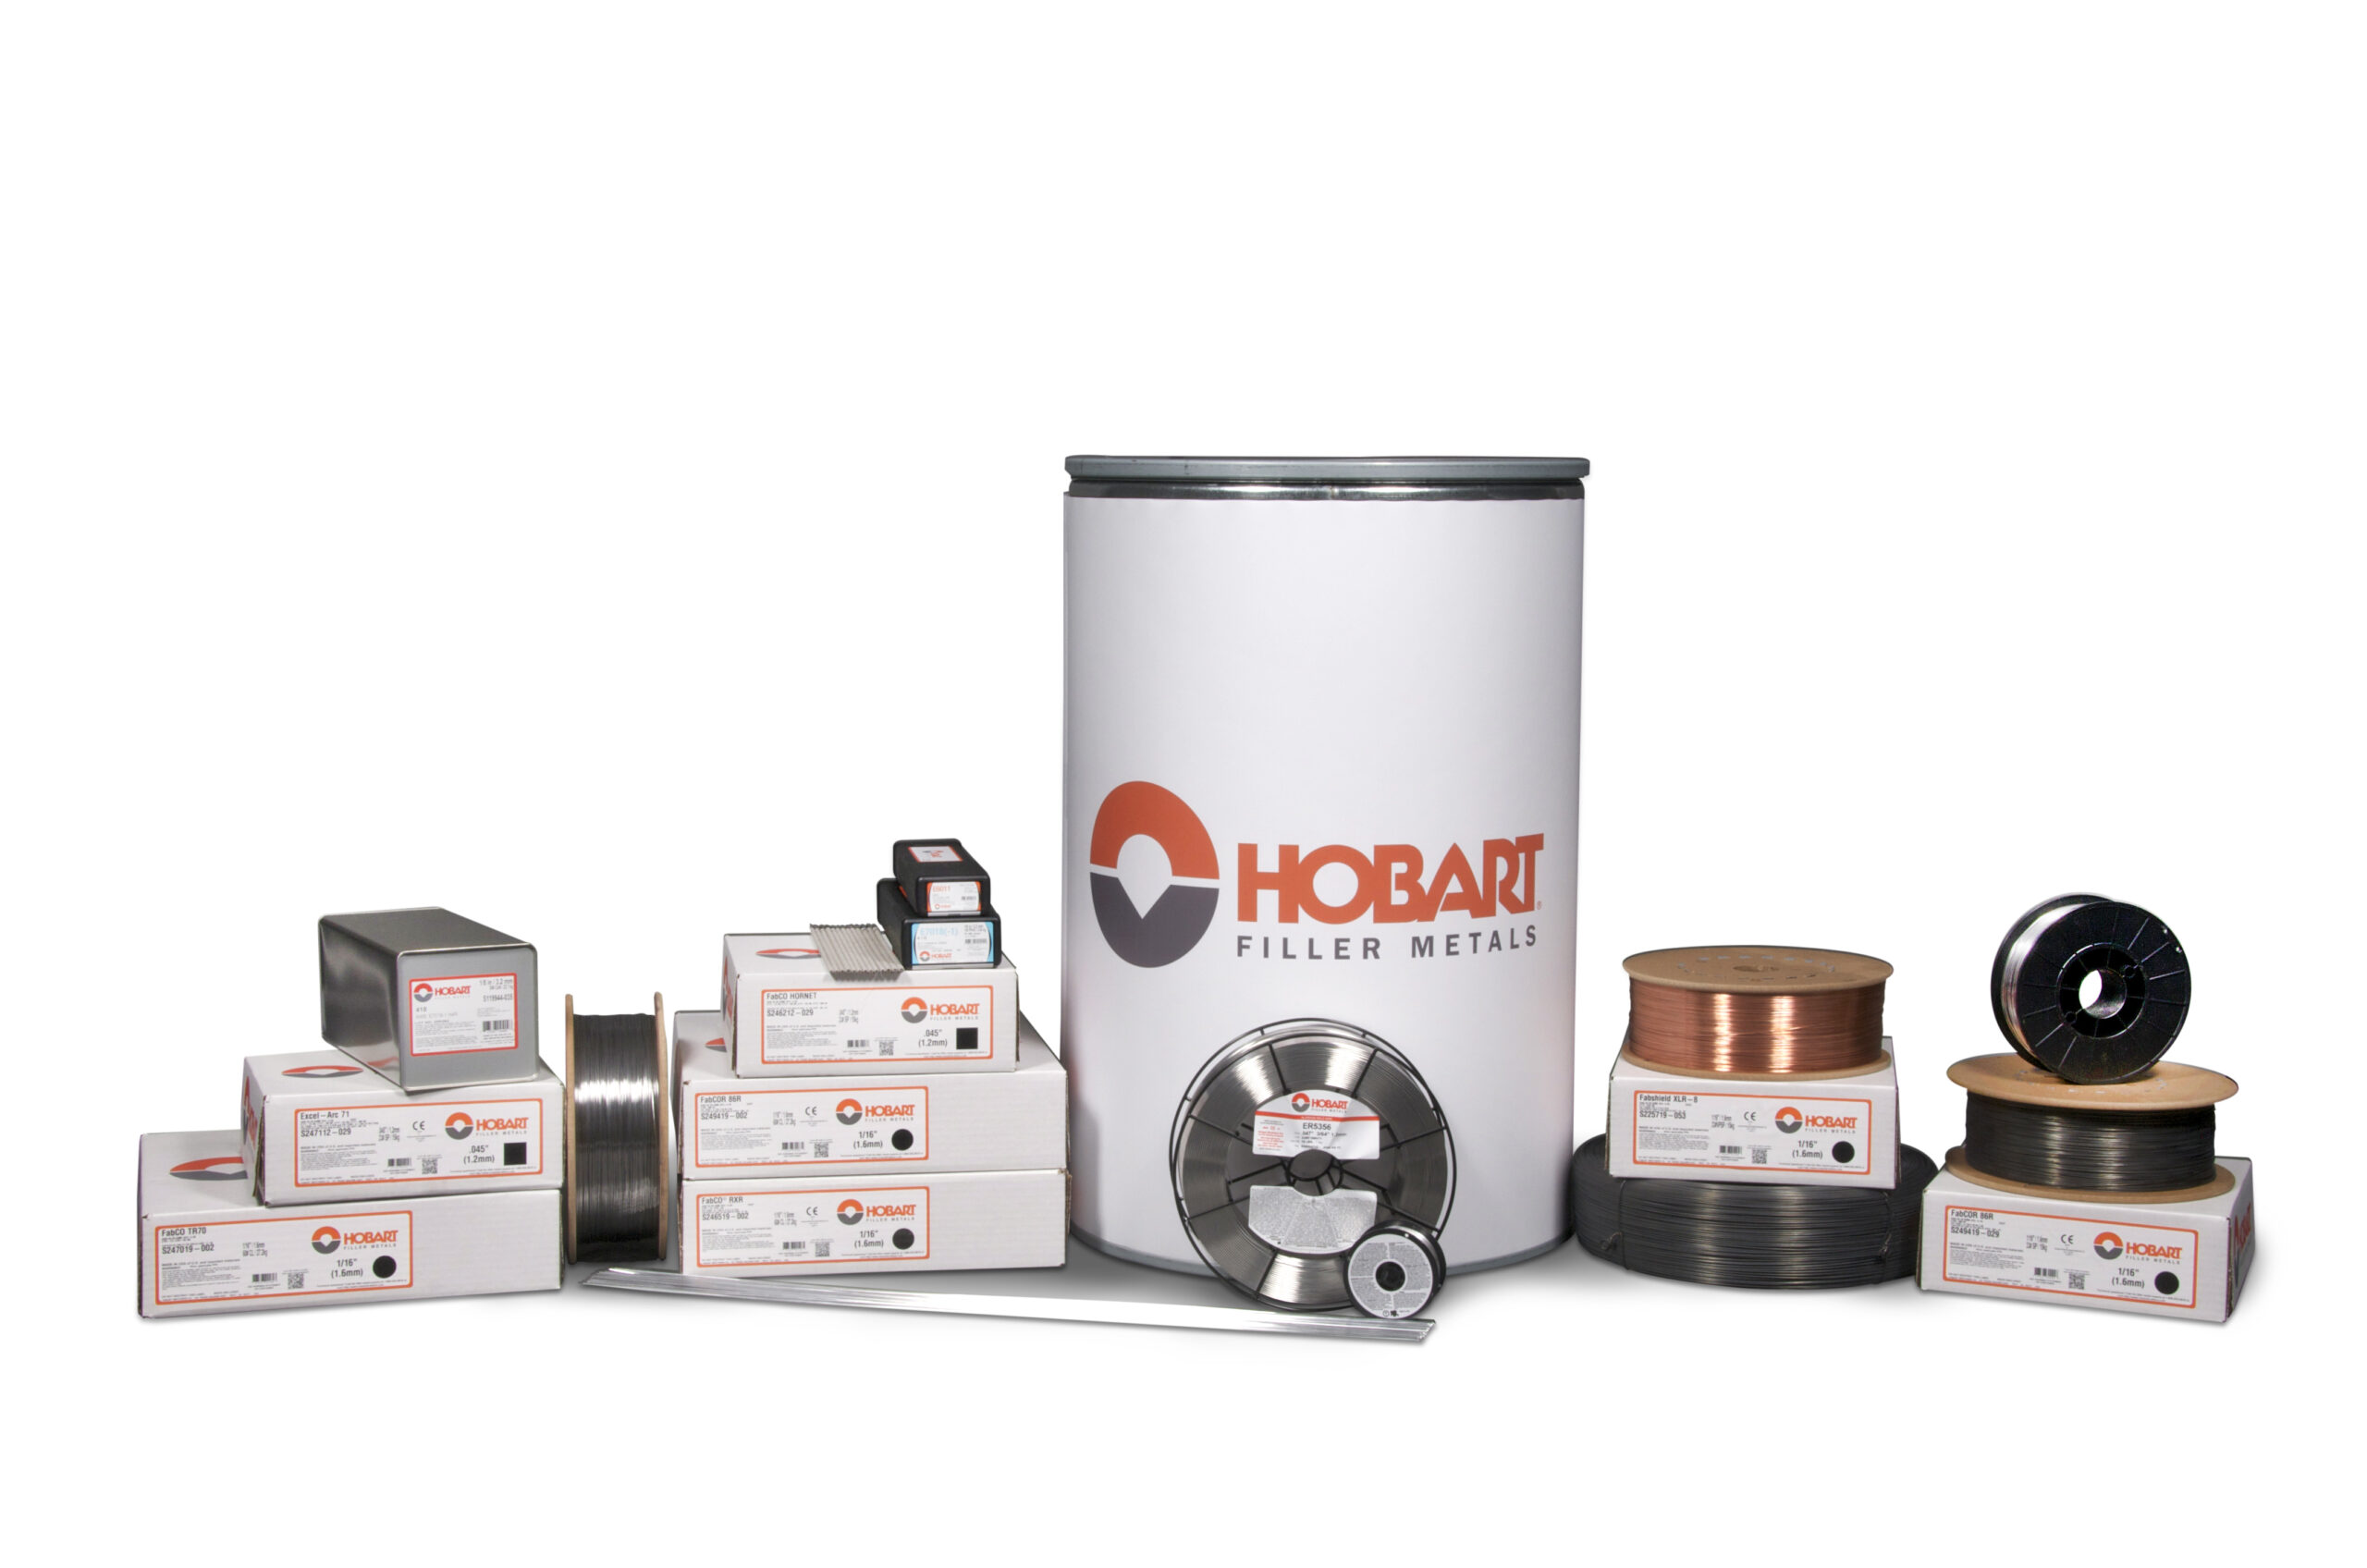 Hobart to Showcase Filler Metals With Live Demos at FABTECH 2022